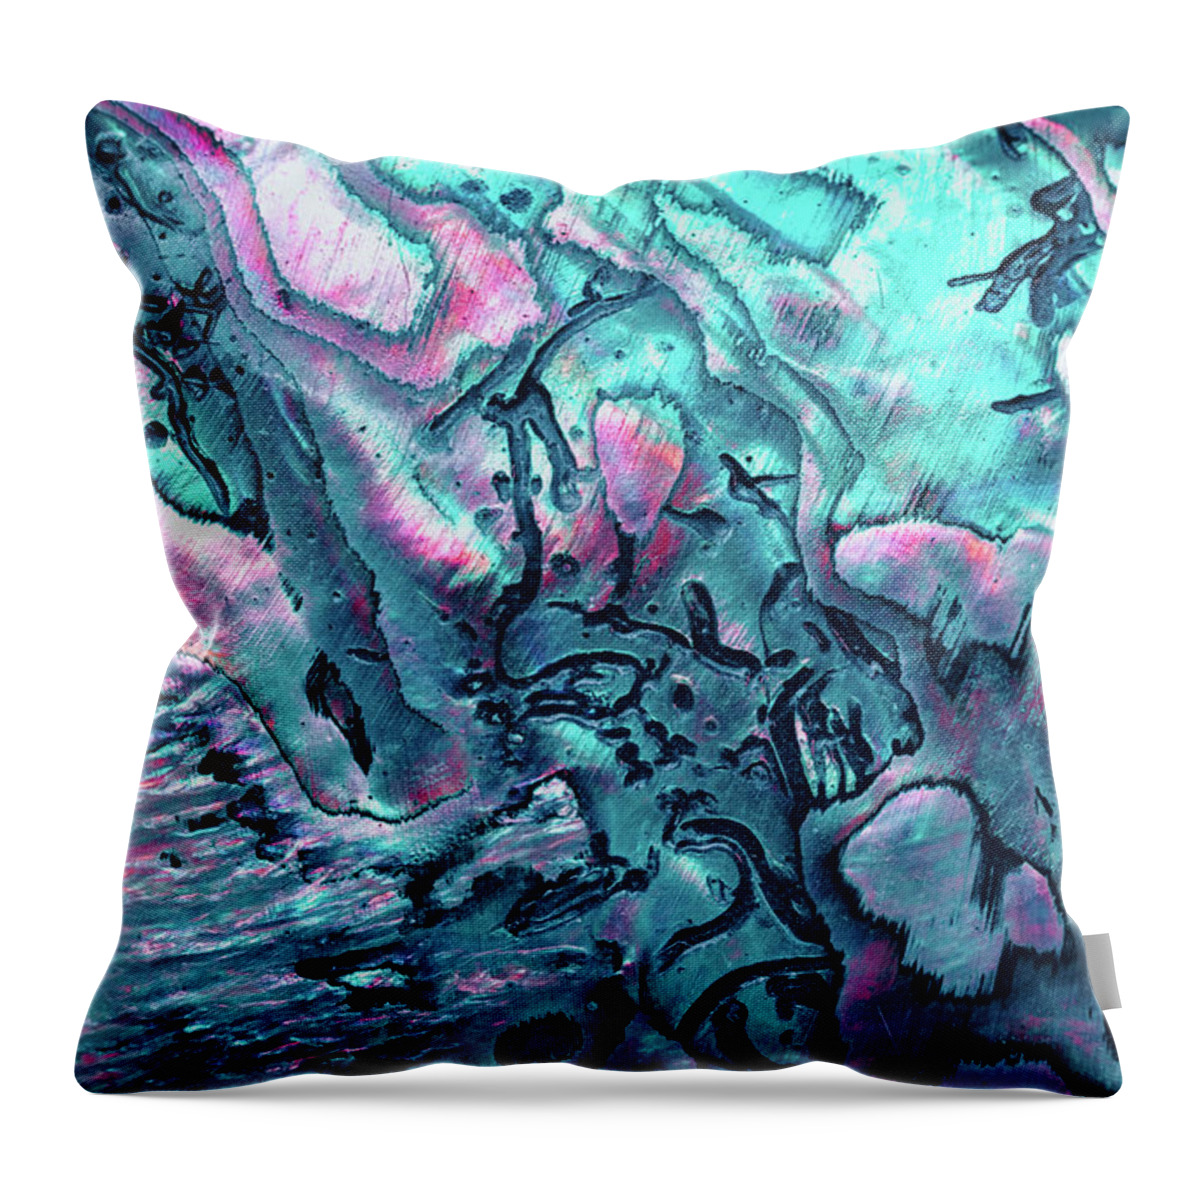 Gemstone Throw Pillow featuring the photograph New Zealand Paua Shell In Blue Colors by Elen11